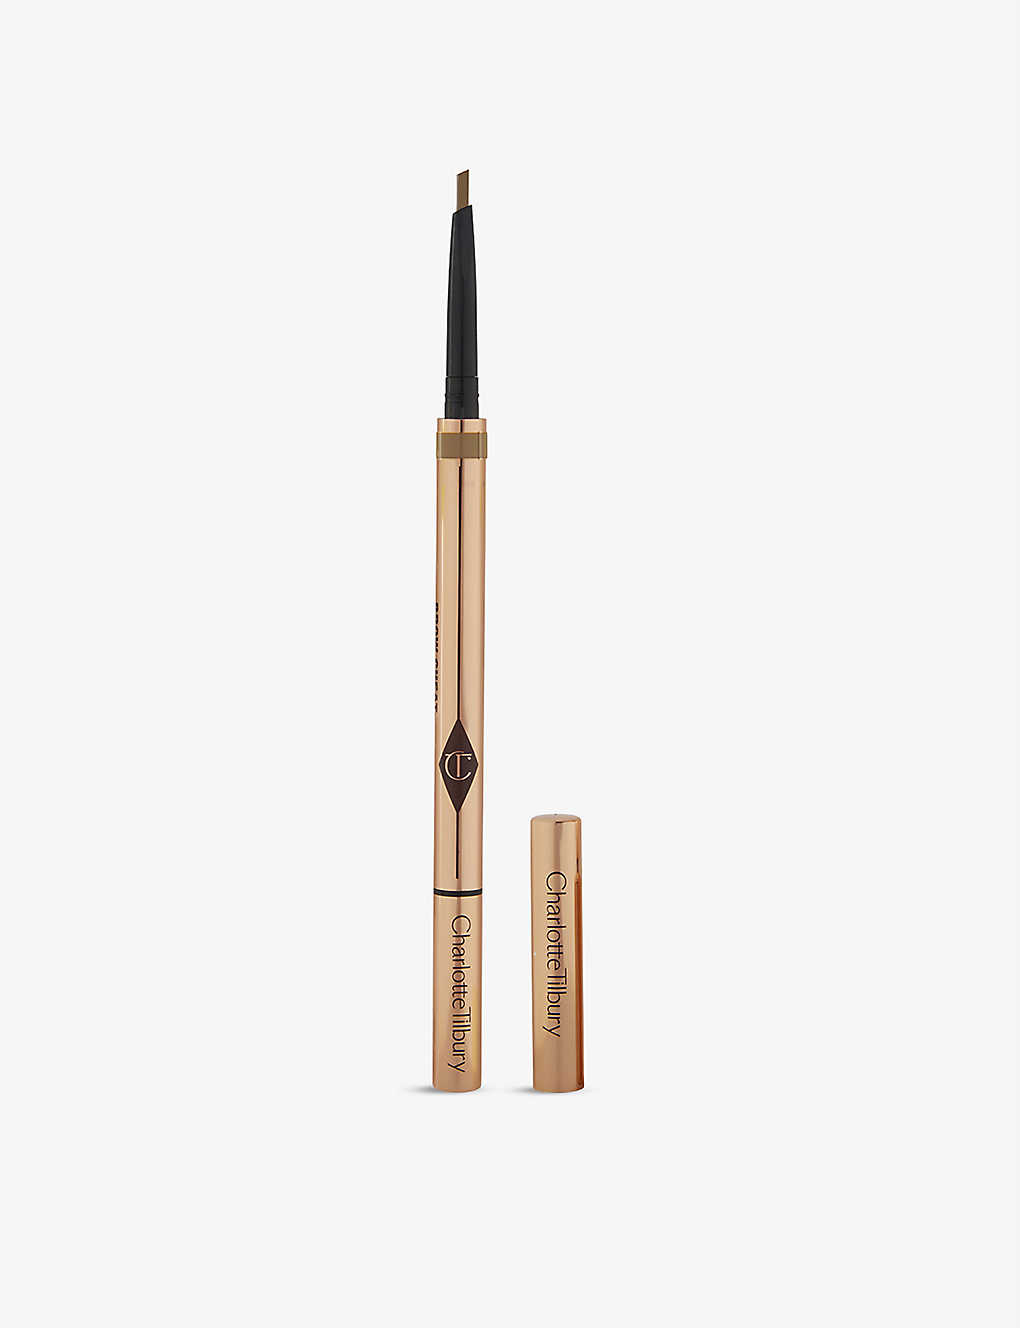 Charlotte Tilbury Brow Cheat Refillable Eyebrow Pencil 0.1g In Light Blonde